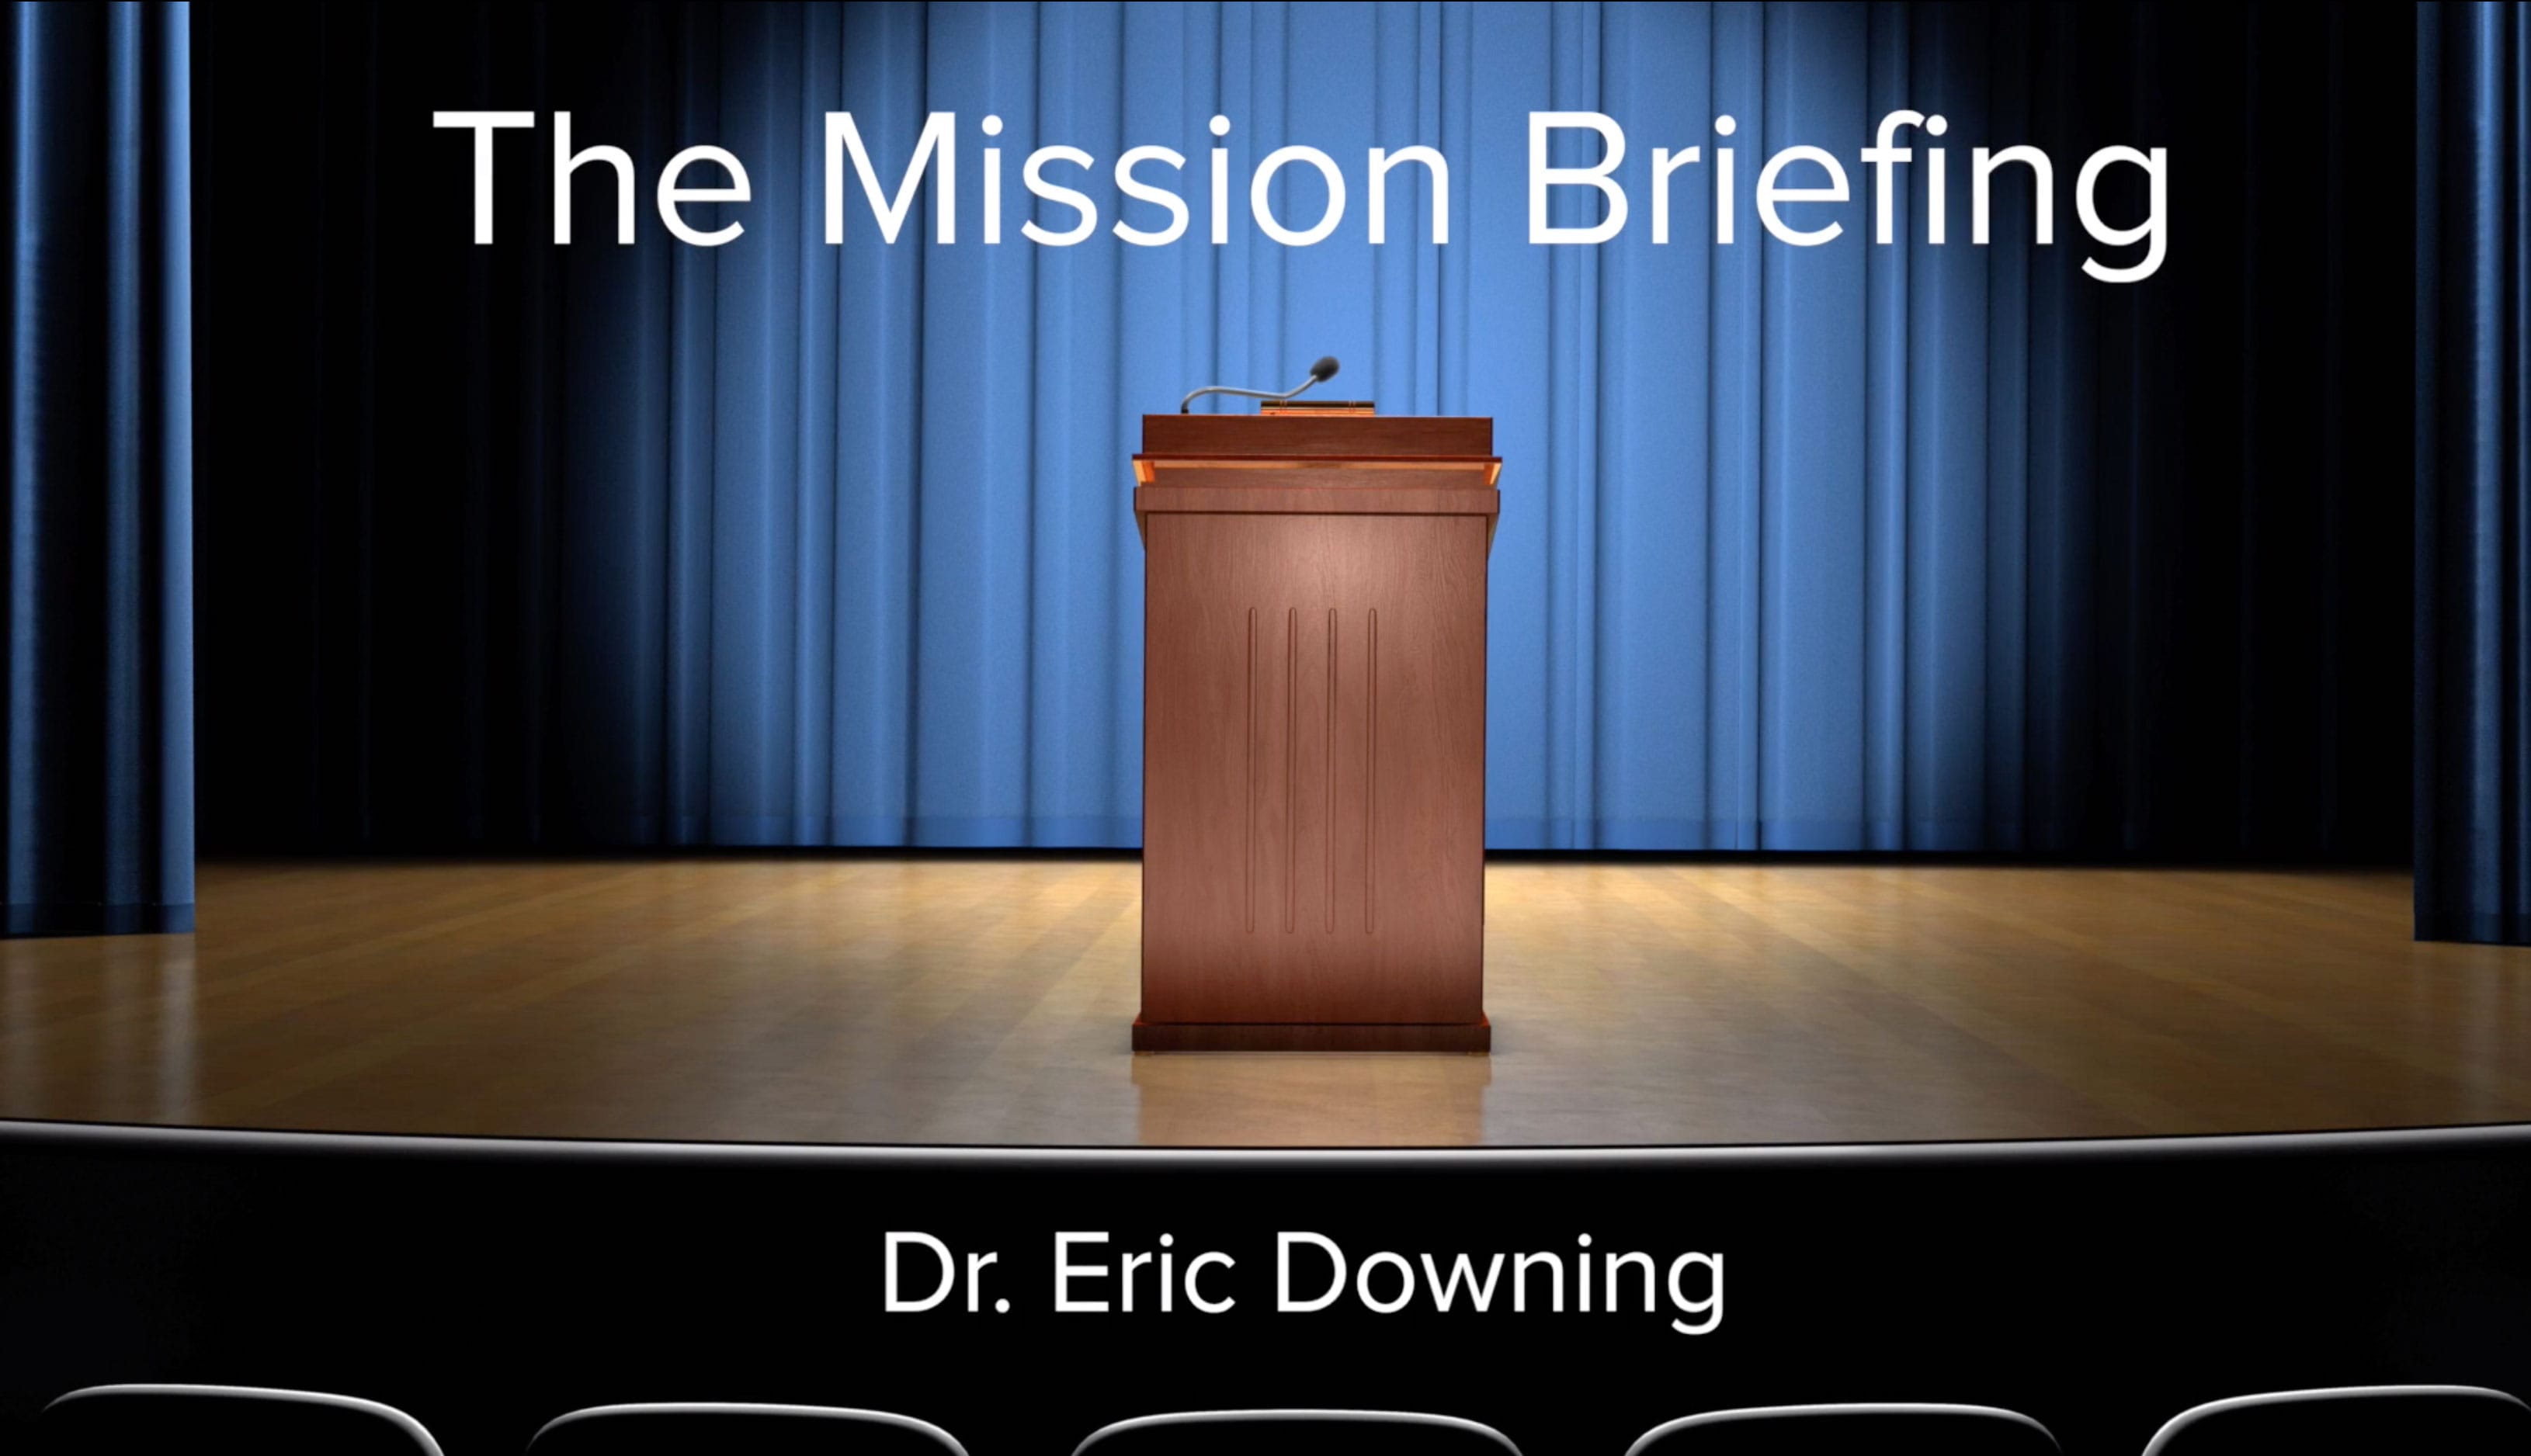 The Mission Briefing